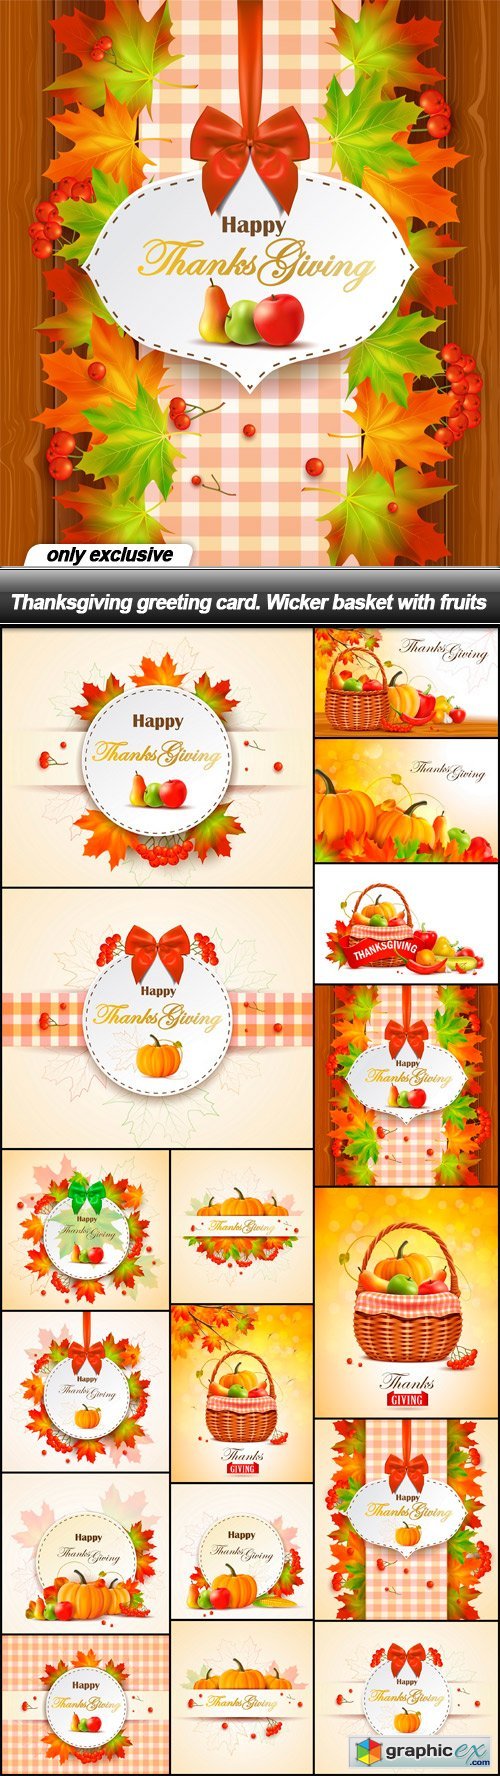 Thanksgiving greeting card. Wicker basket with fruits - 17 EPS